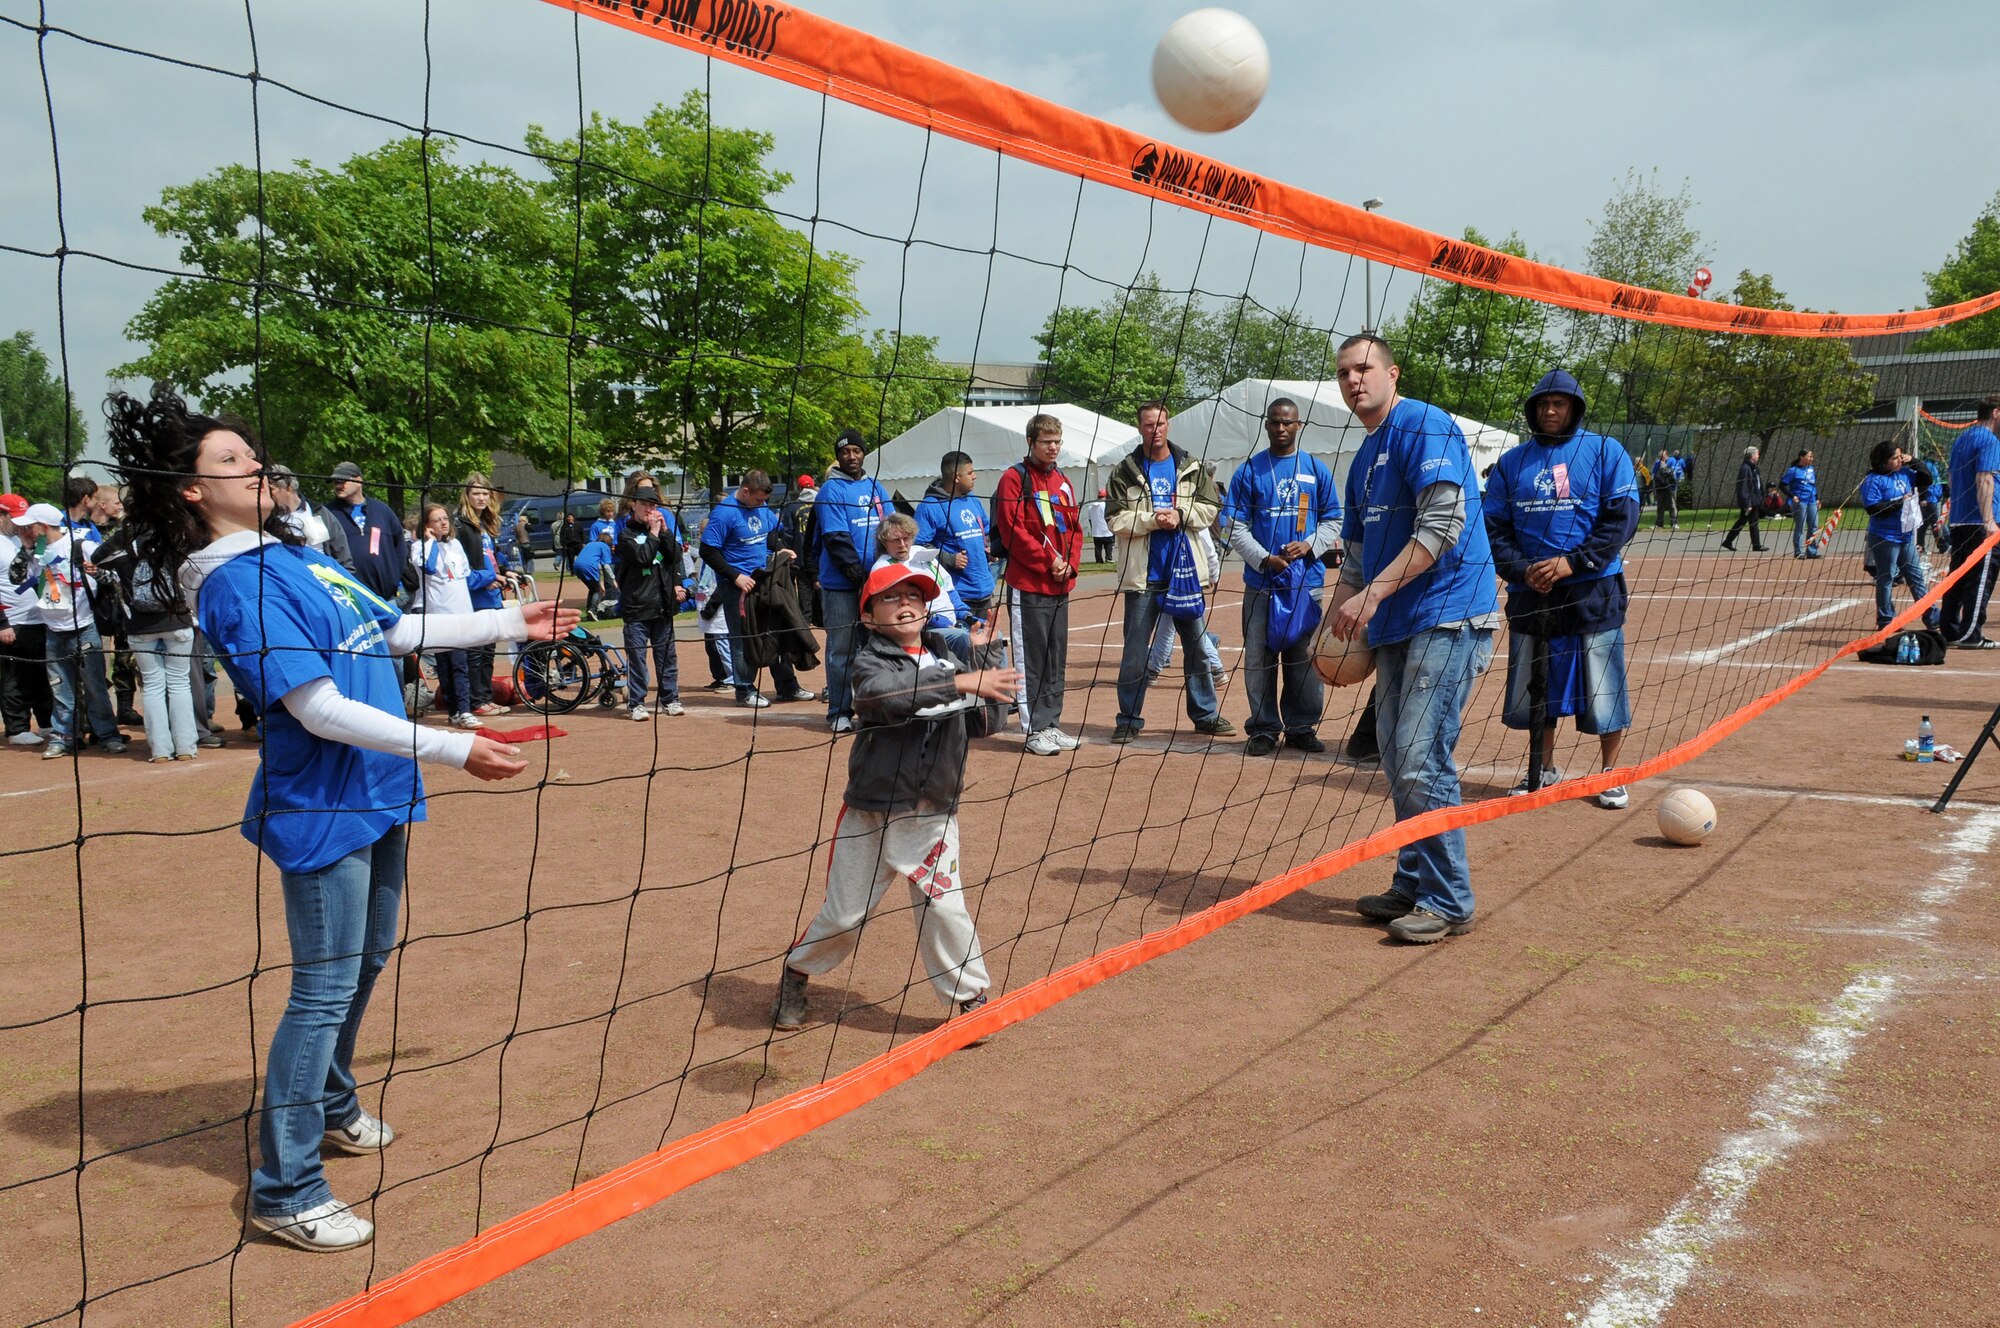 A German local national hits the ball over the net while playing a game of volleyball during the 36th Annual Special Olympics held in Enkenbach-Alsenborn, Germany, May 6, 2009. Special Olympics is an international program of year-round sports training and athletic competition for more than 1.7 million children and adults with disabilities in more than 150 countries including Germany. (U.S. Air Force photo by Airman 1st Class Grovert Fuentes-Contreras)(Released)